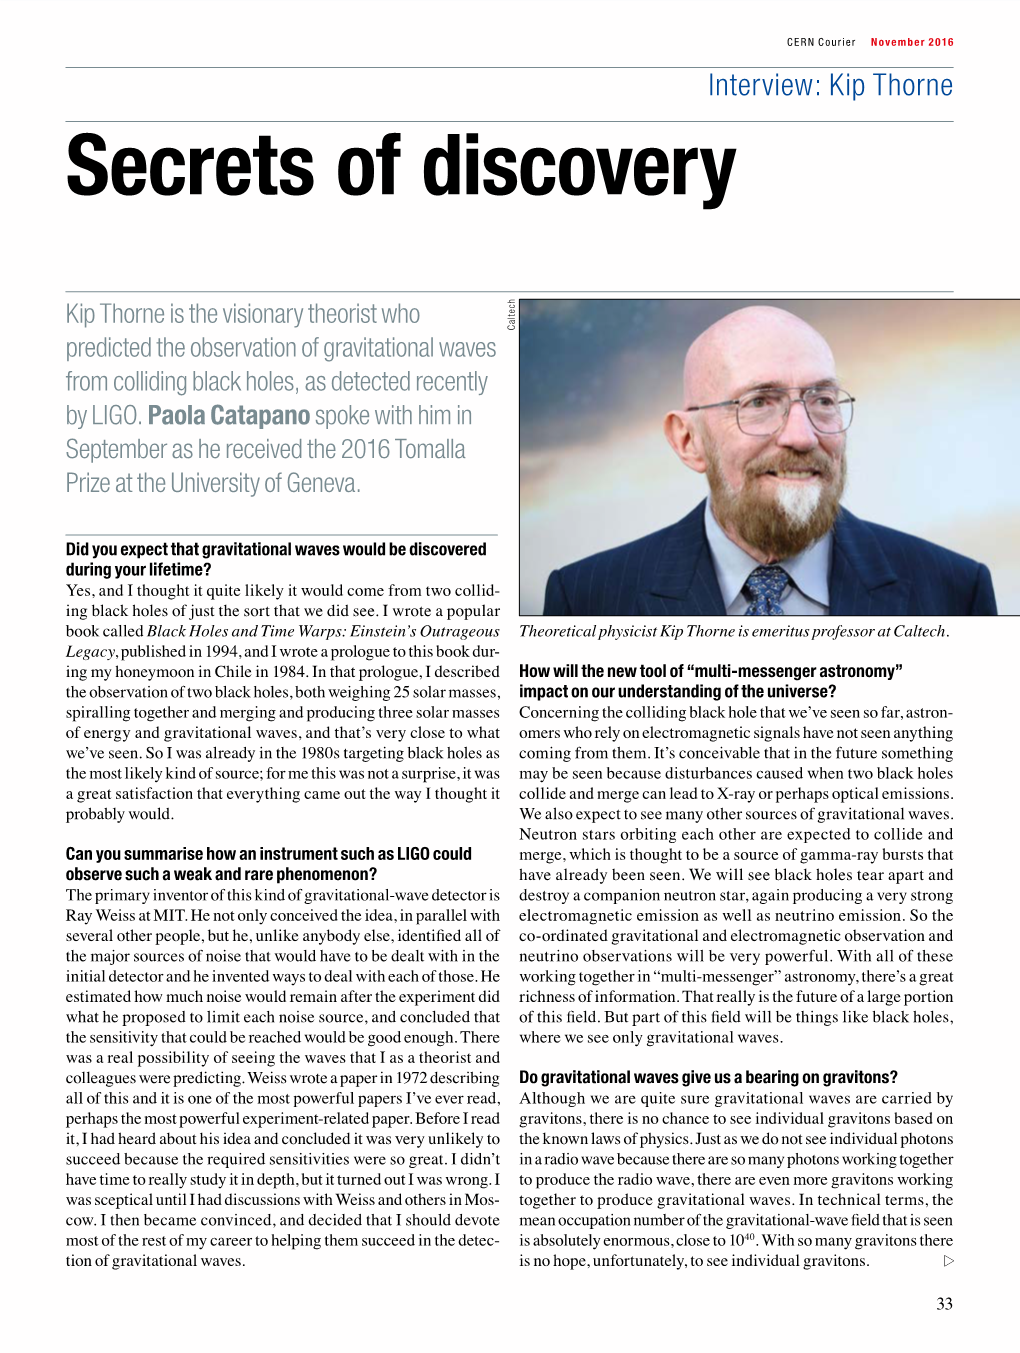 Secrets of Discovery